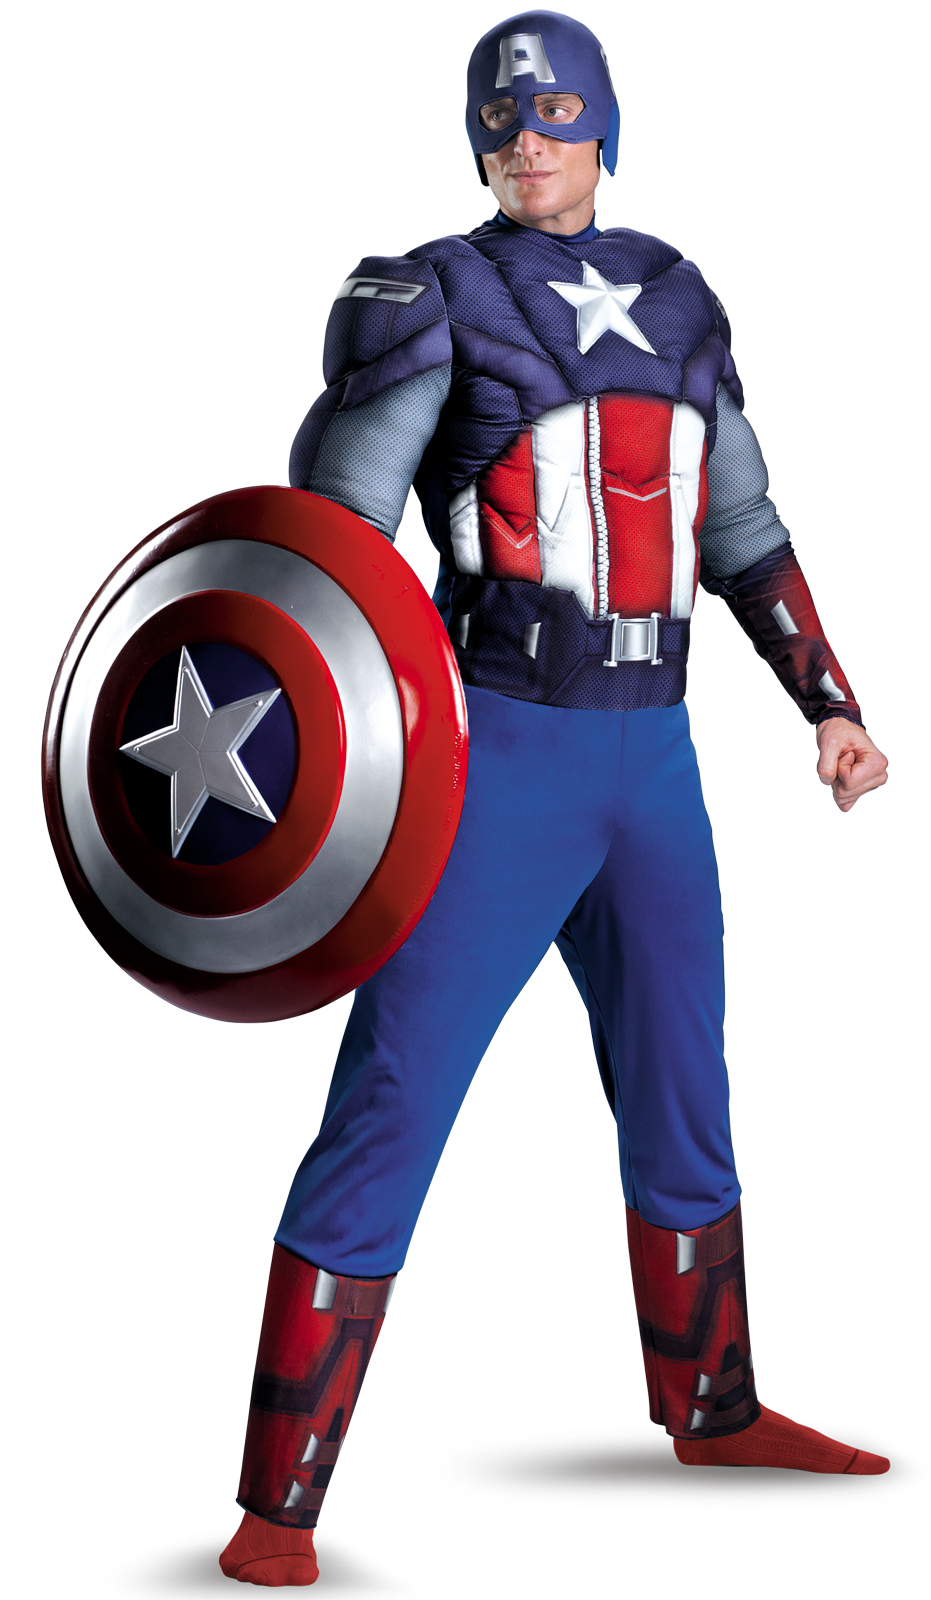 The Avengers Captain America Muscle Plus Adult Costume